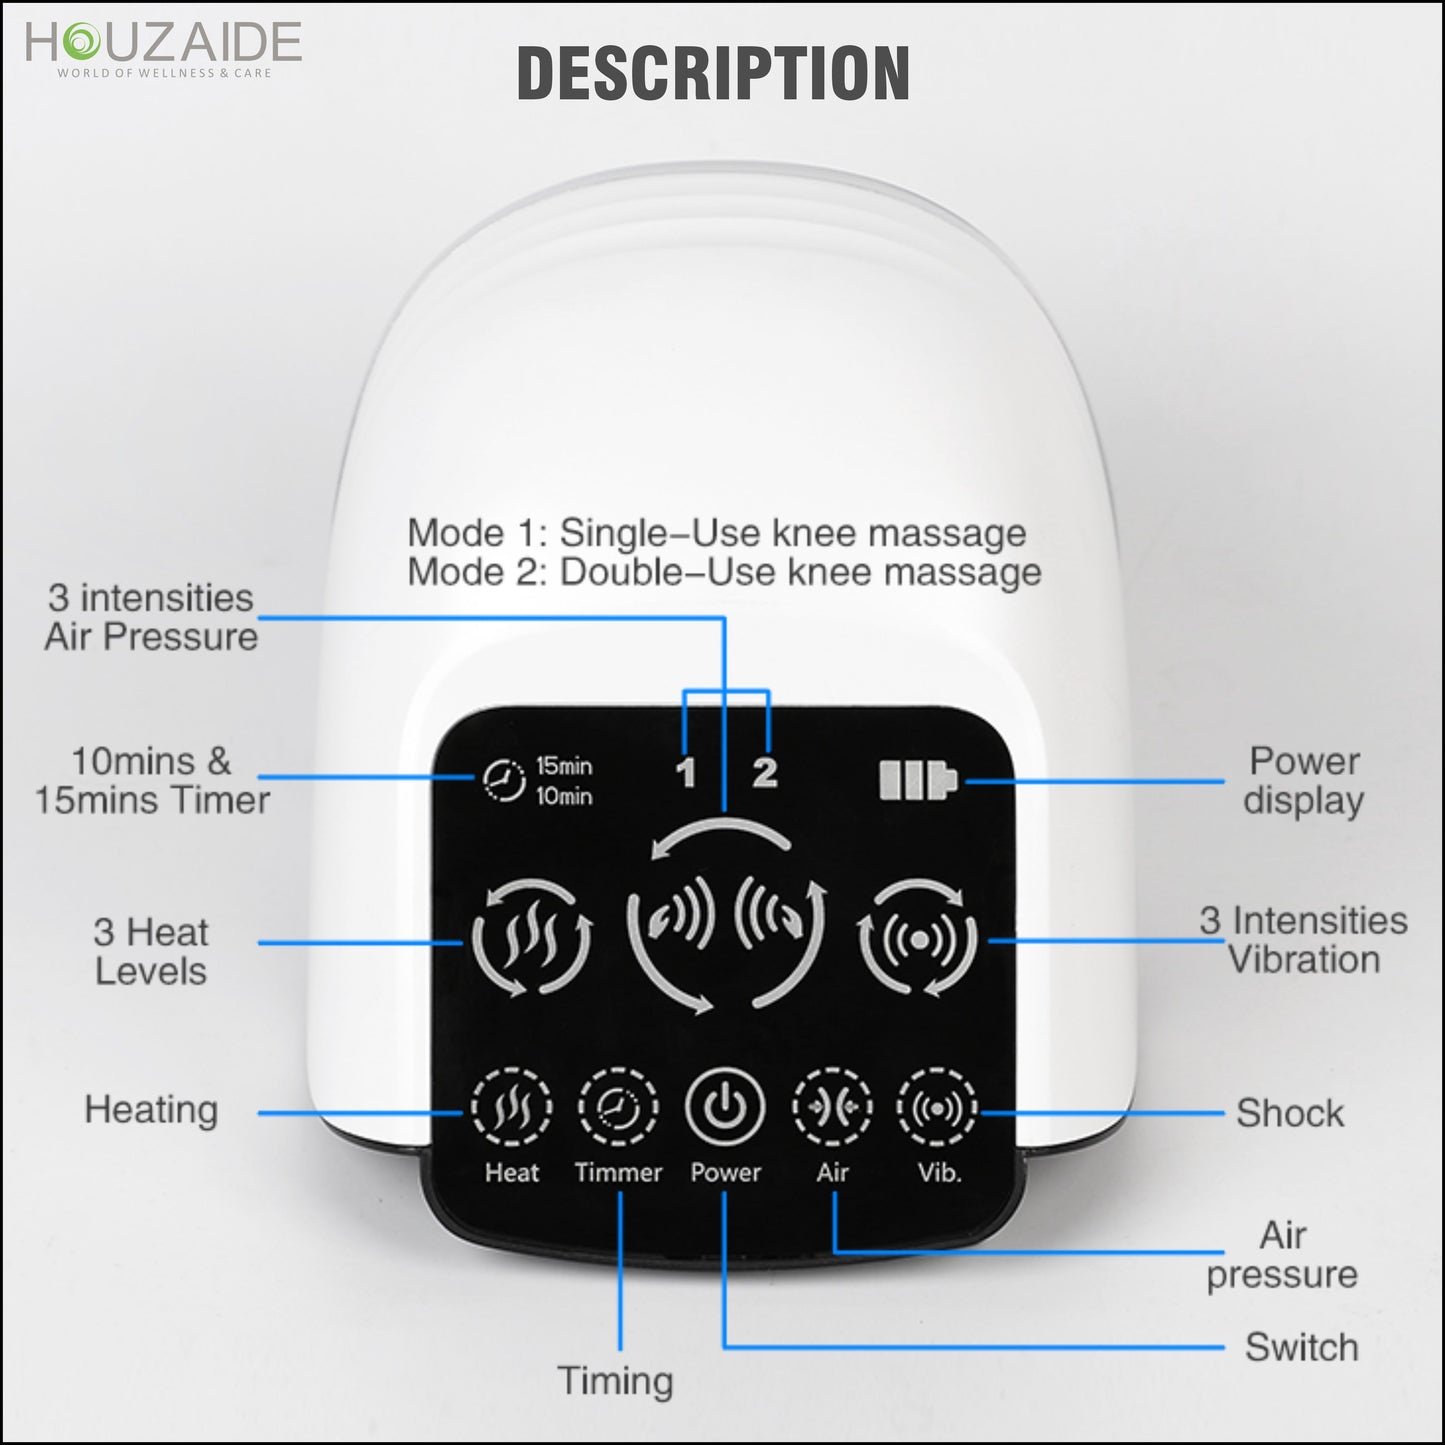 HOUZAIDE 3D Smart Knee Massager for joint pain relief- Physiotherapy for Arthritis Pain, Cramps, Knee Pain Relief, Knee Heat Therapy| Advance upgraded version with human hand like massage, timer, vibration and heat control